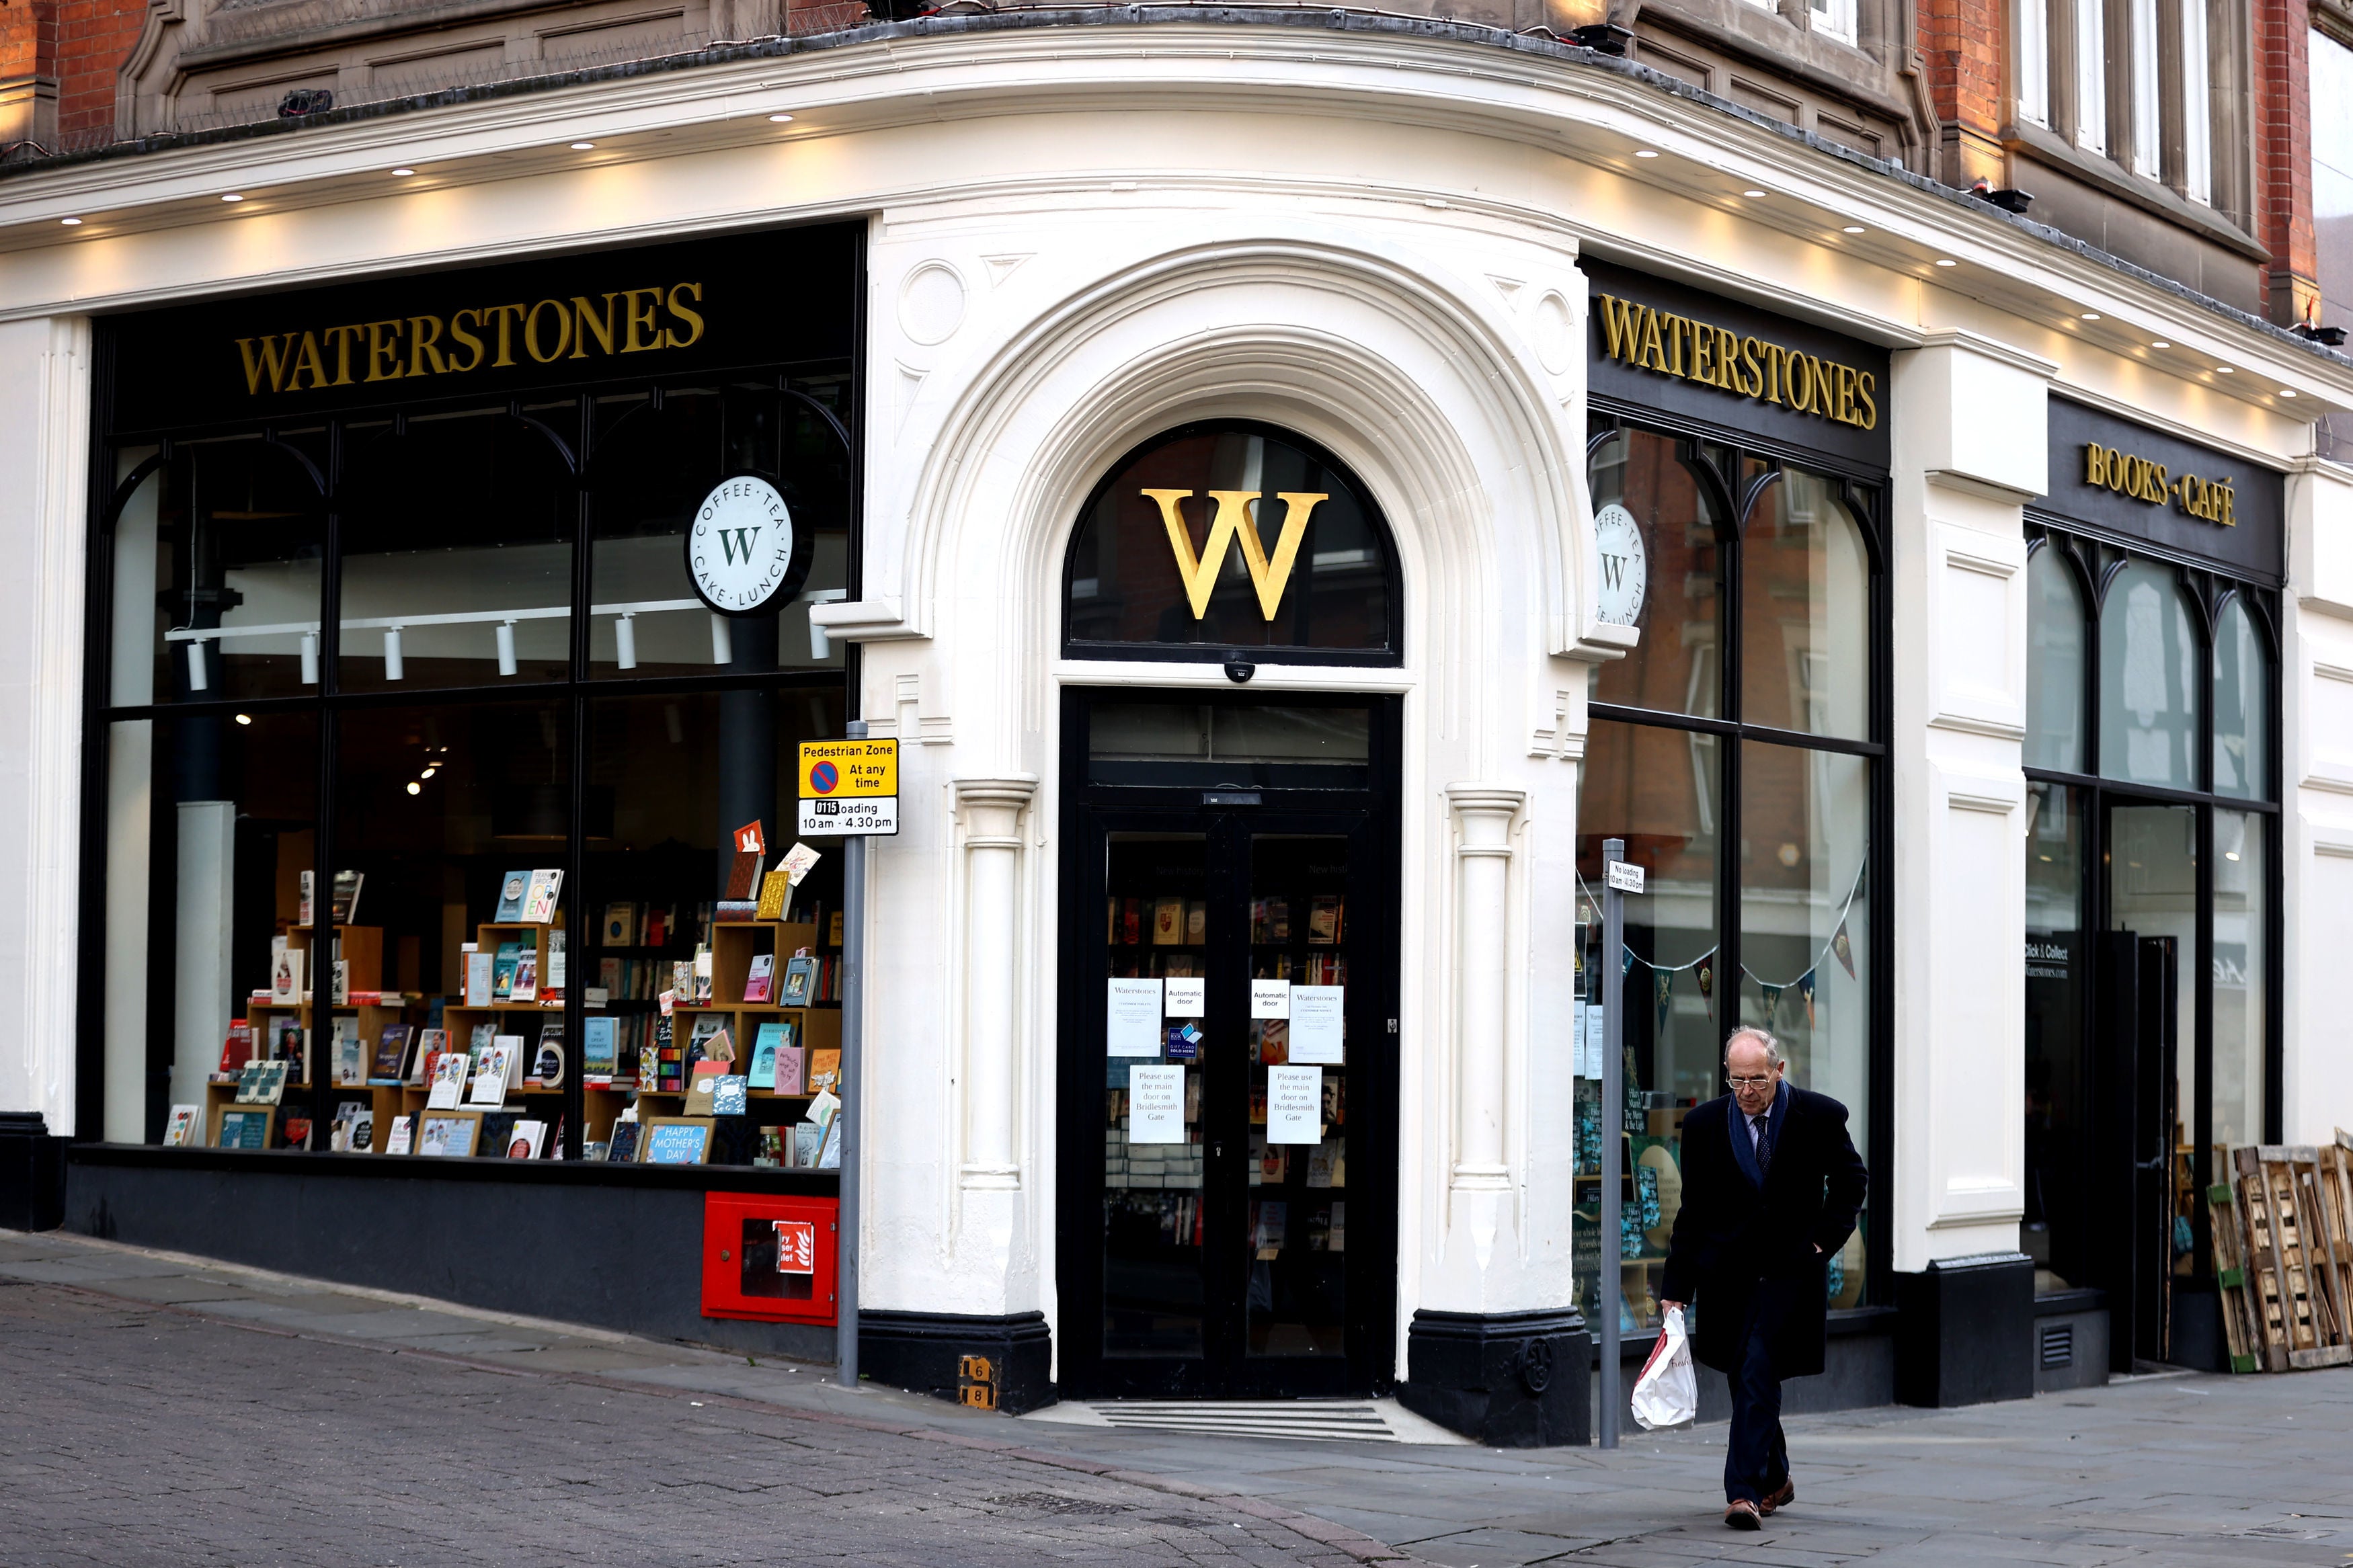 LGBTQ+ advocates and activists are now calling on Waterstones to reinstate the bookseller.